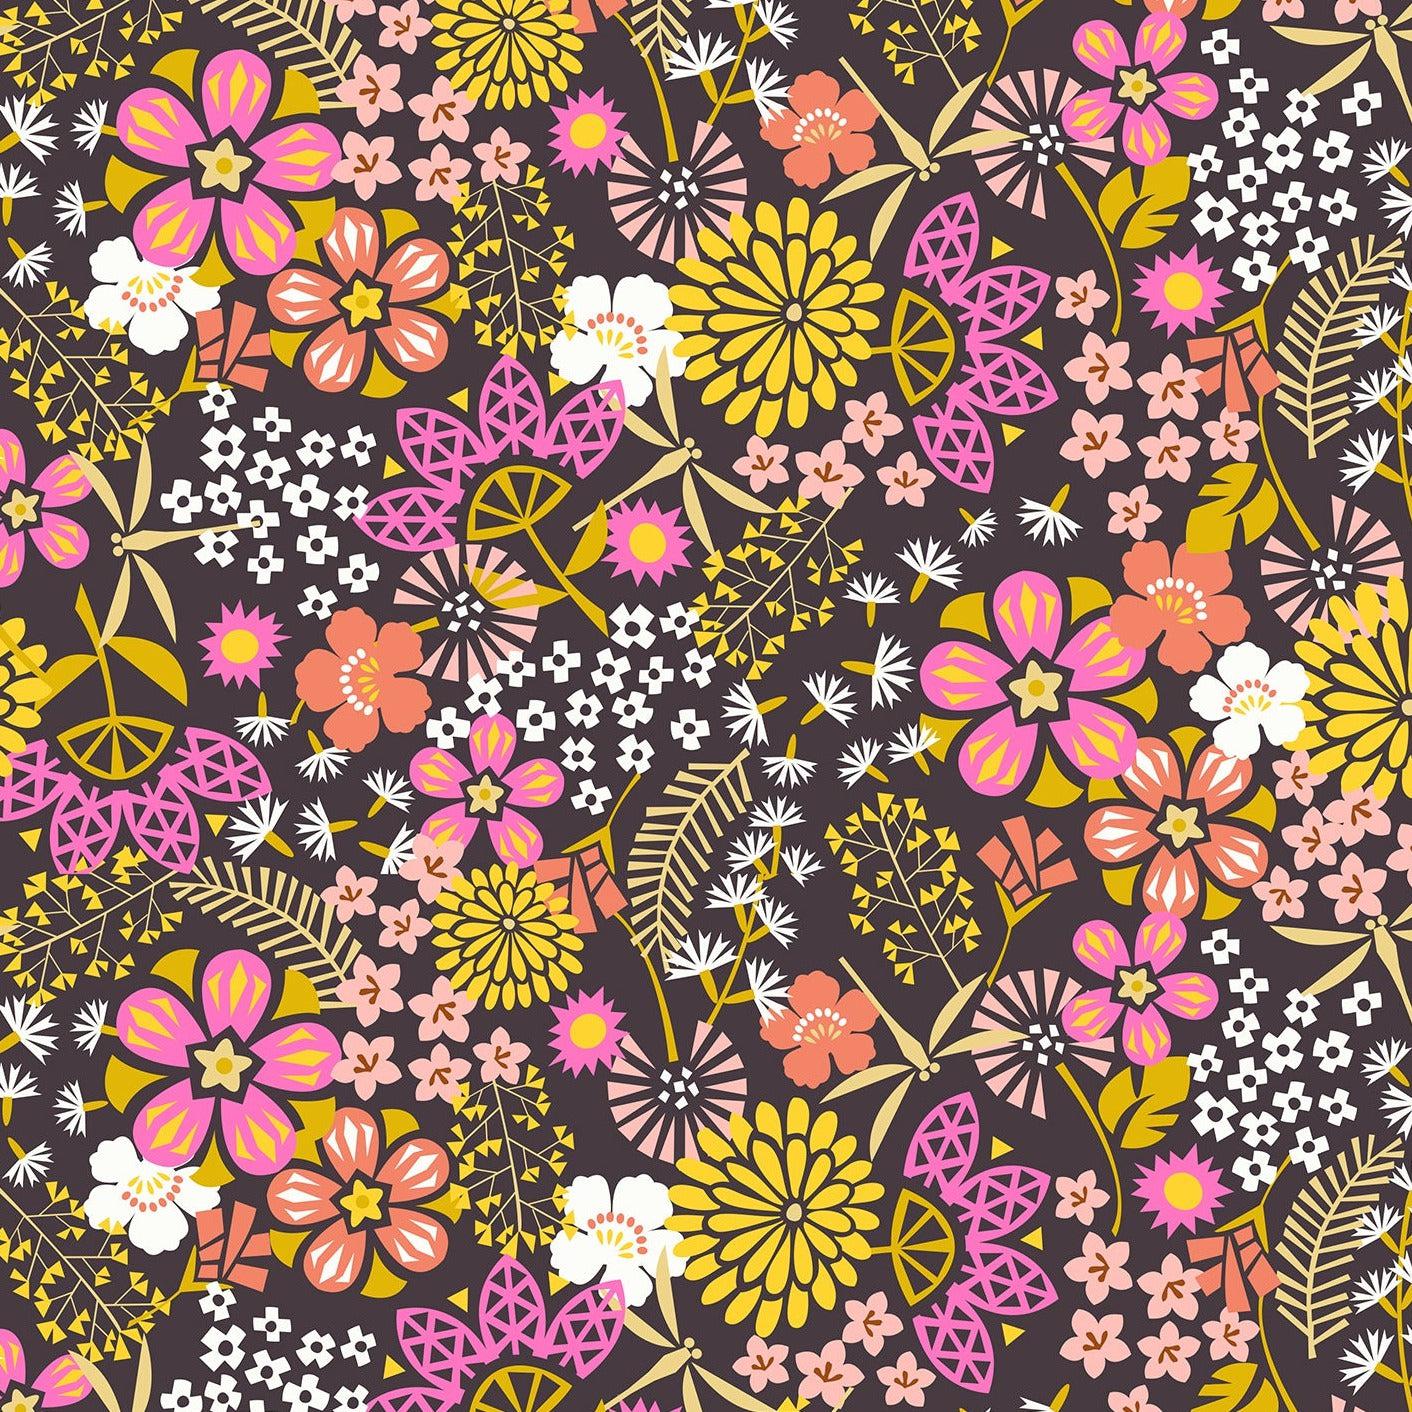 Ruby Star Society-Koi Floral Caviar-fabric-gather here online